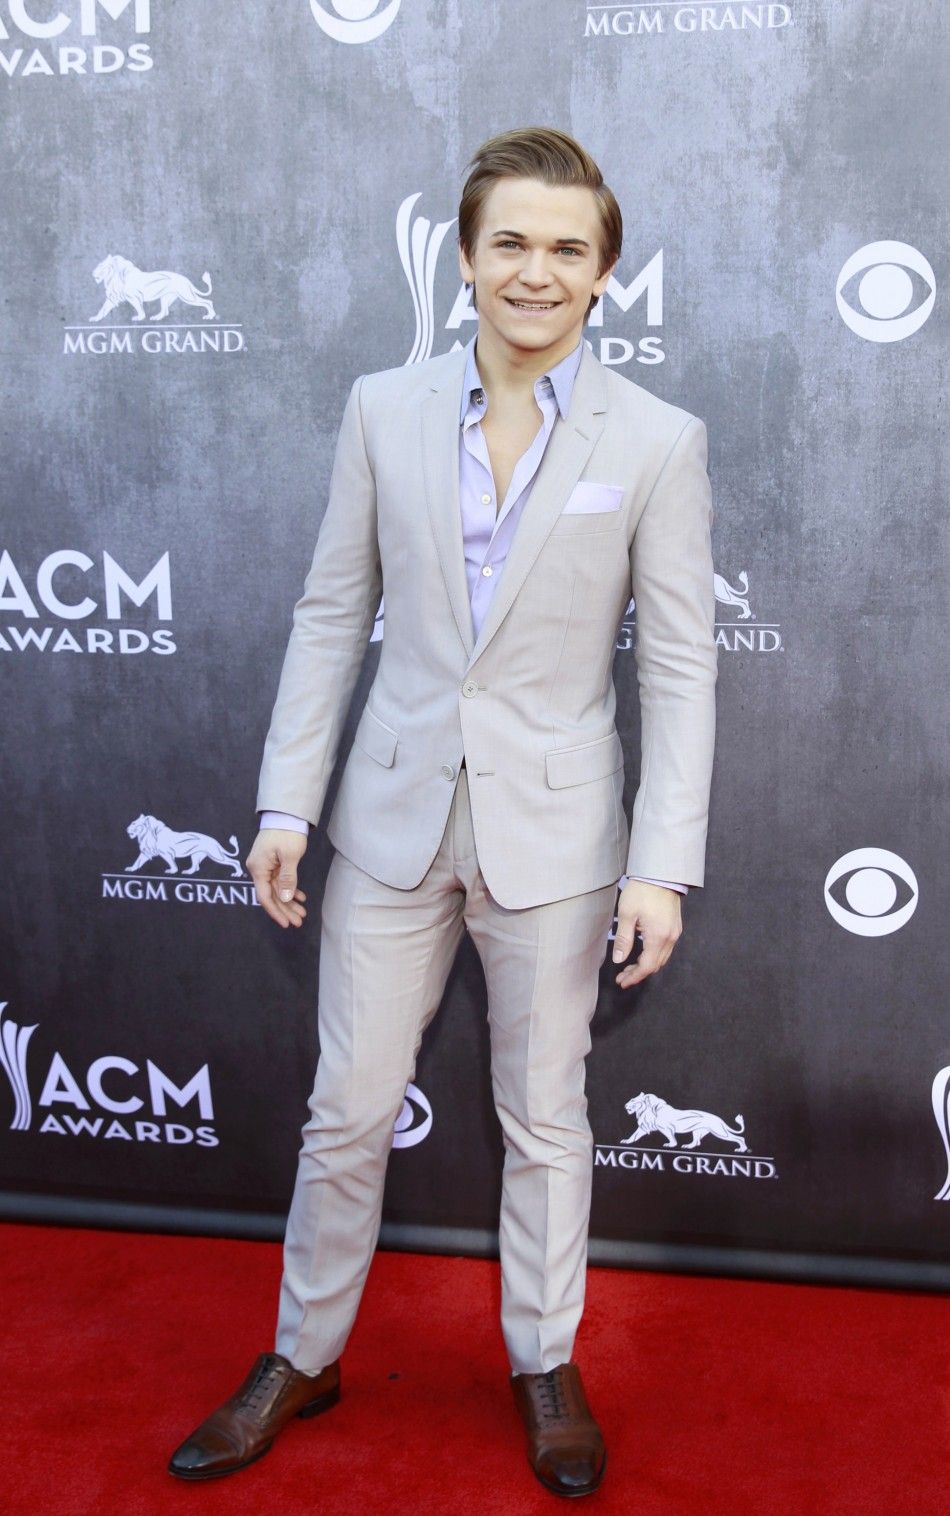 Country music singer Hunter Hayes arrives at the 49th Annual Academy of Country Music Awards in Las Vegas